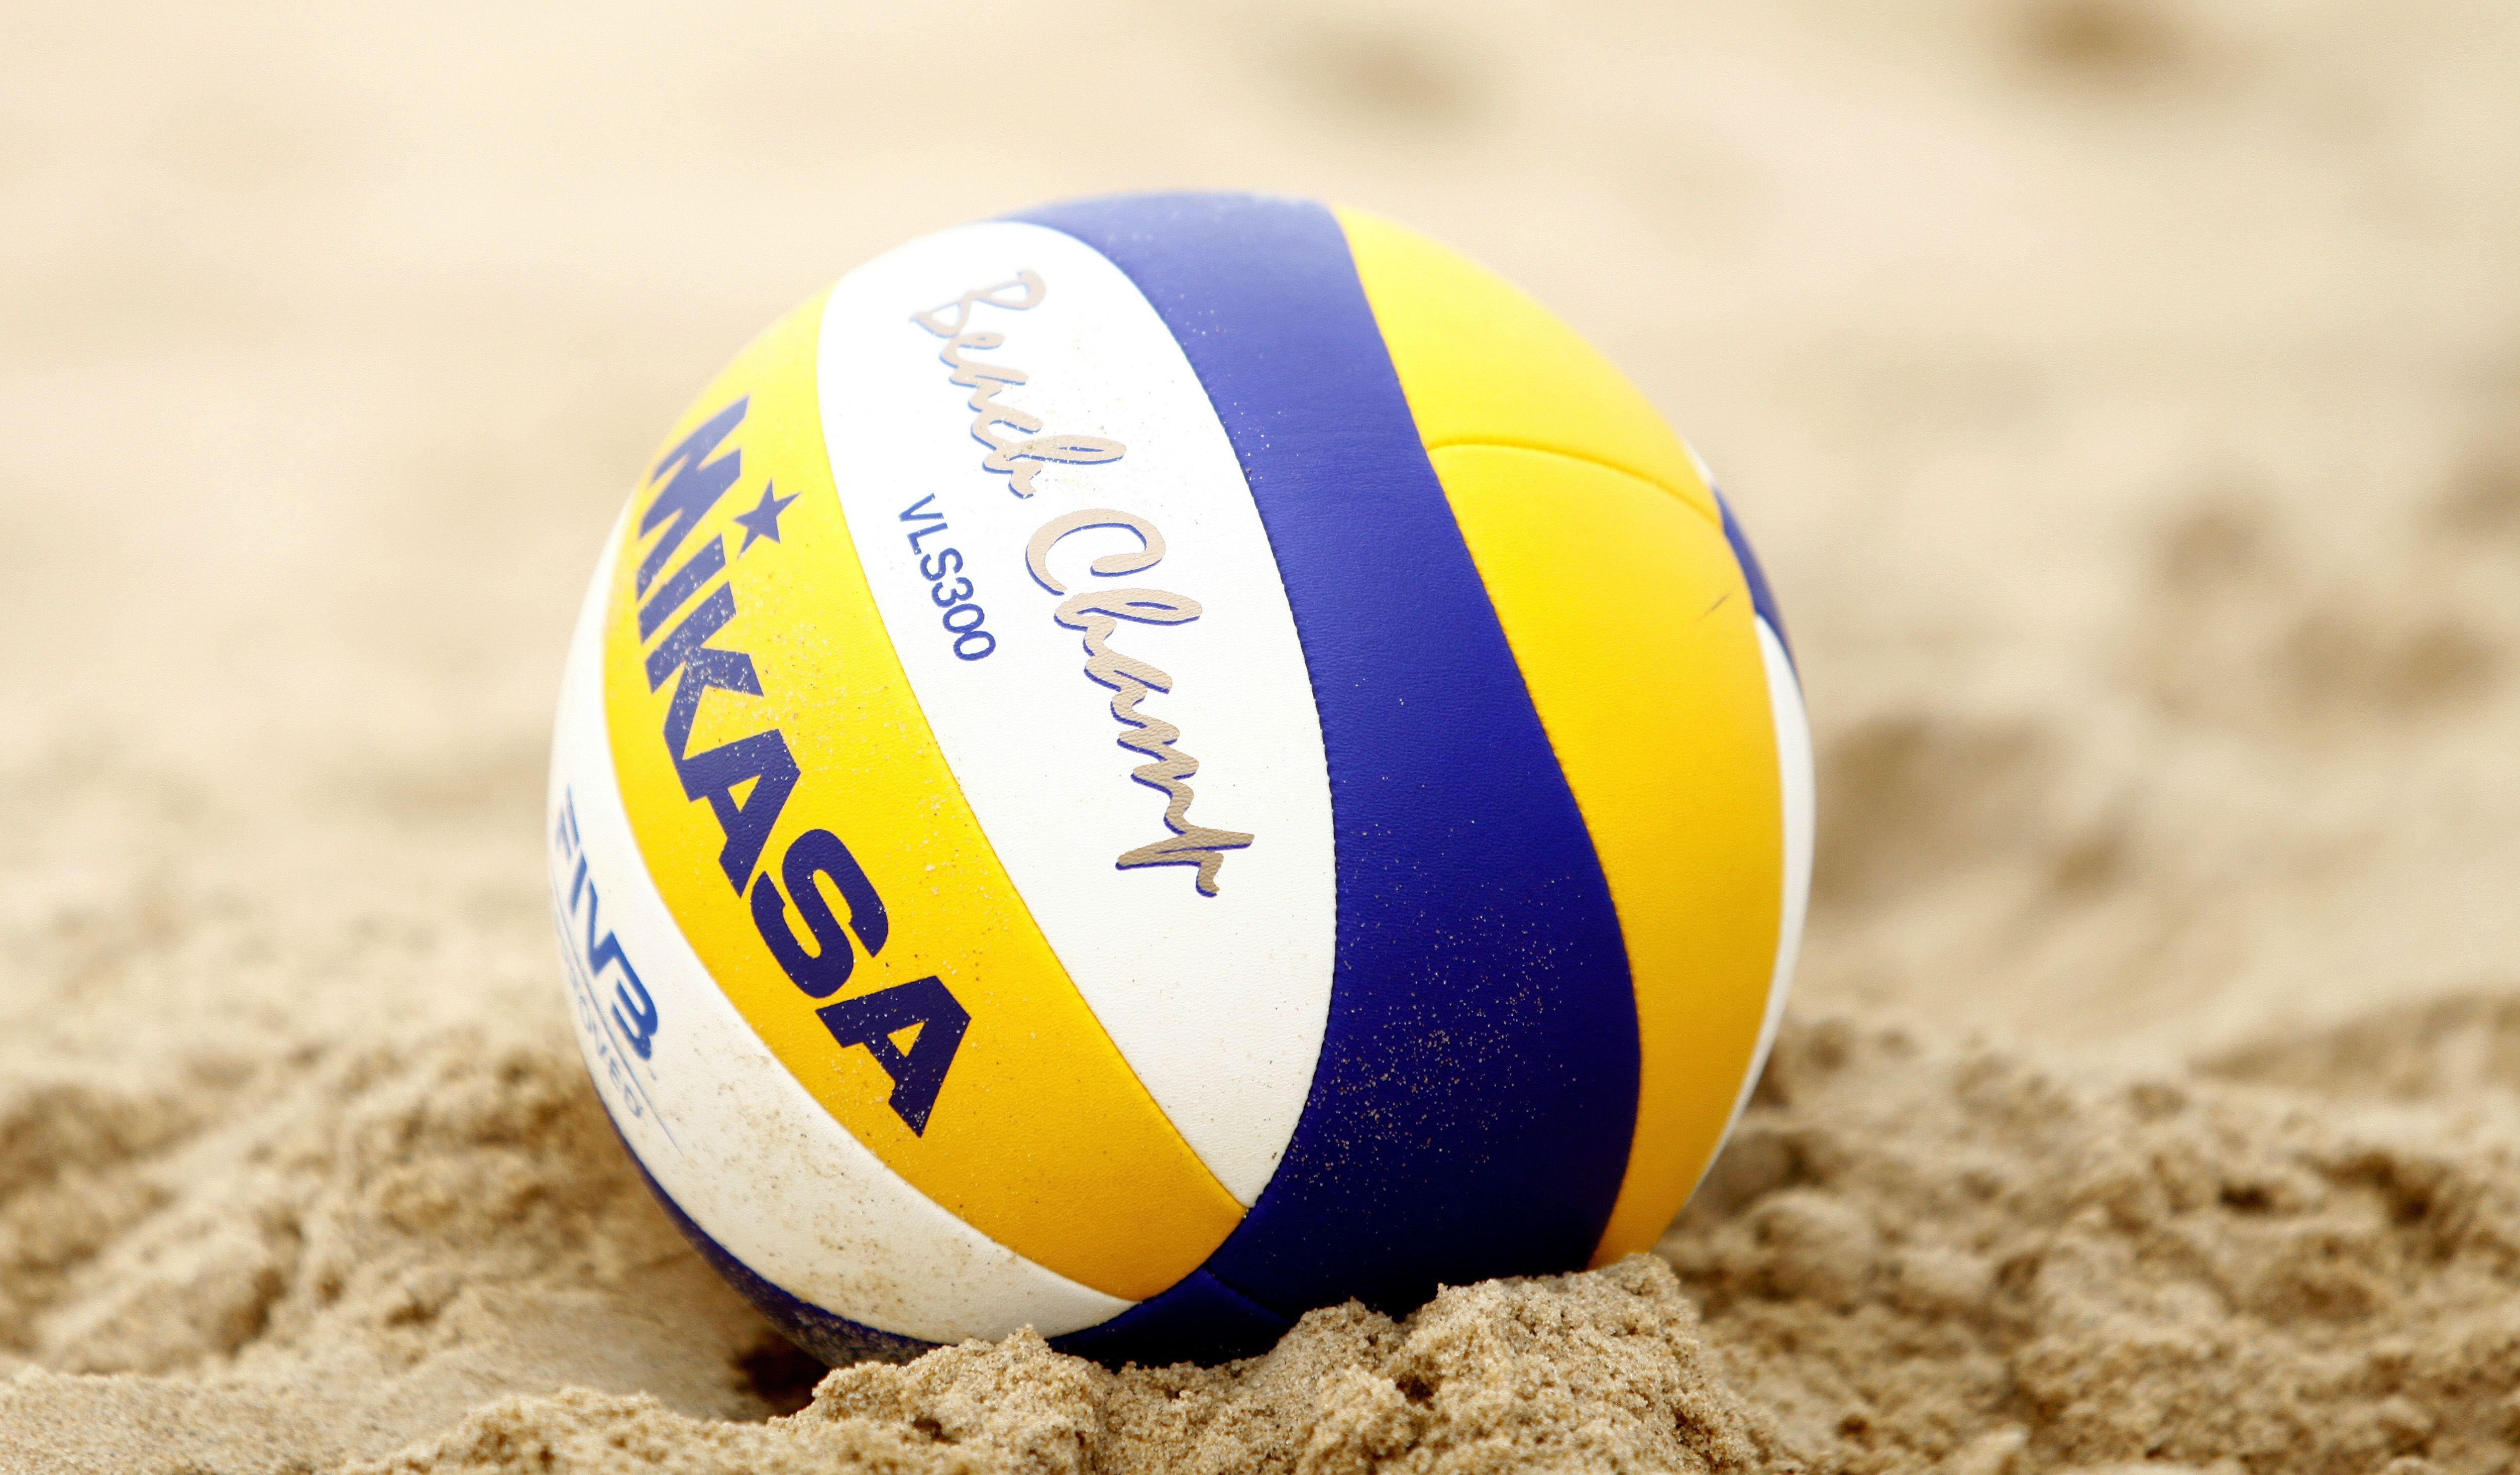 Beach Volleyball Free HD Wallpaper Image Background